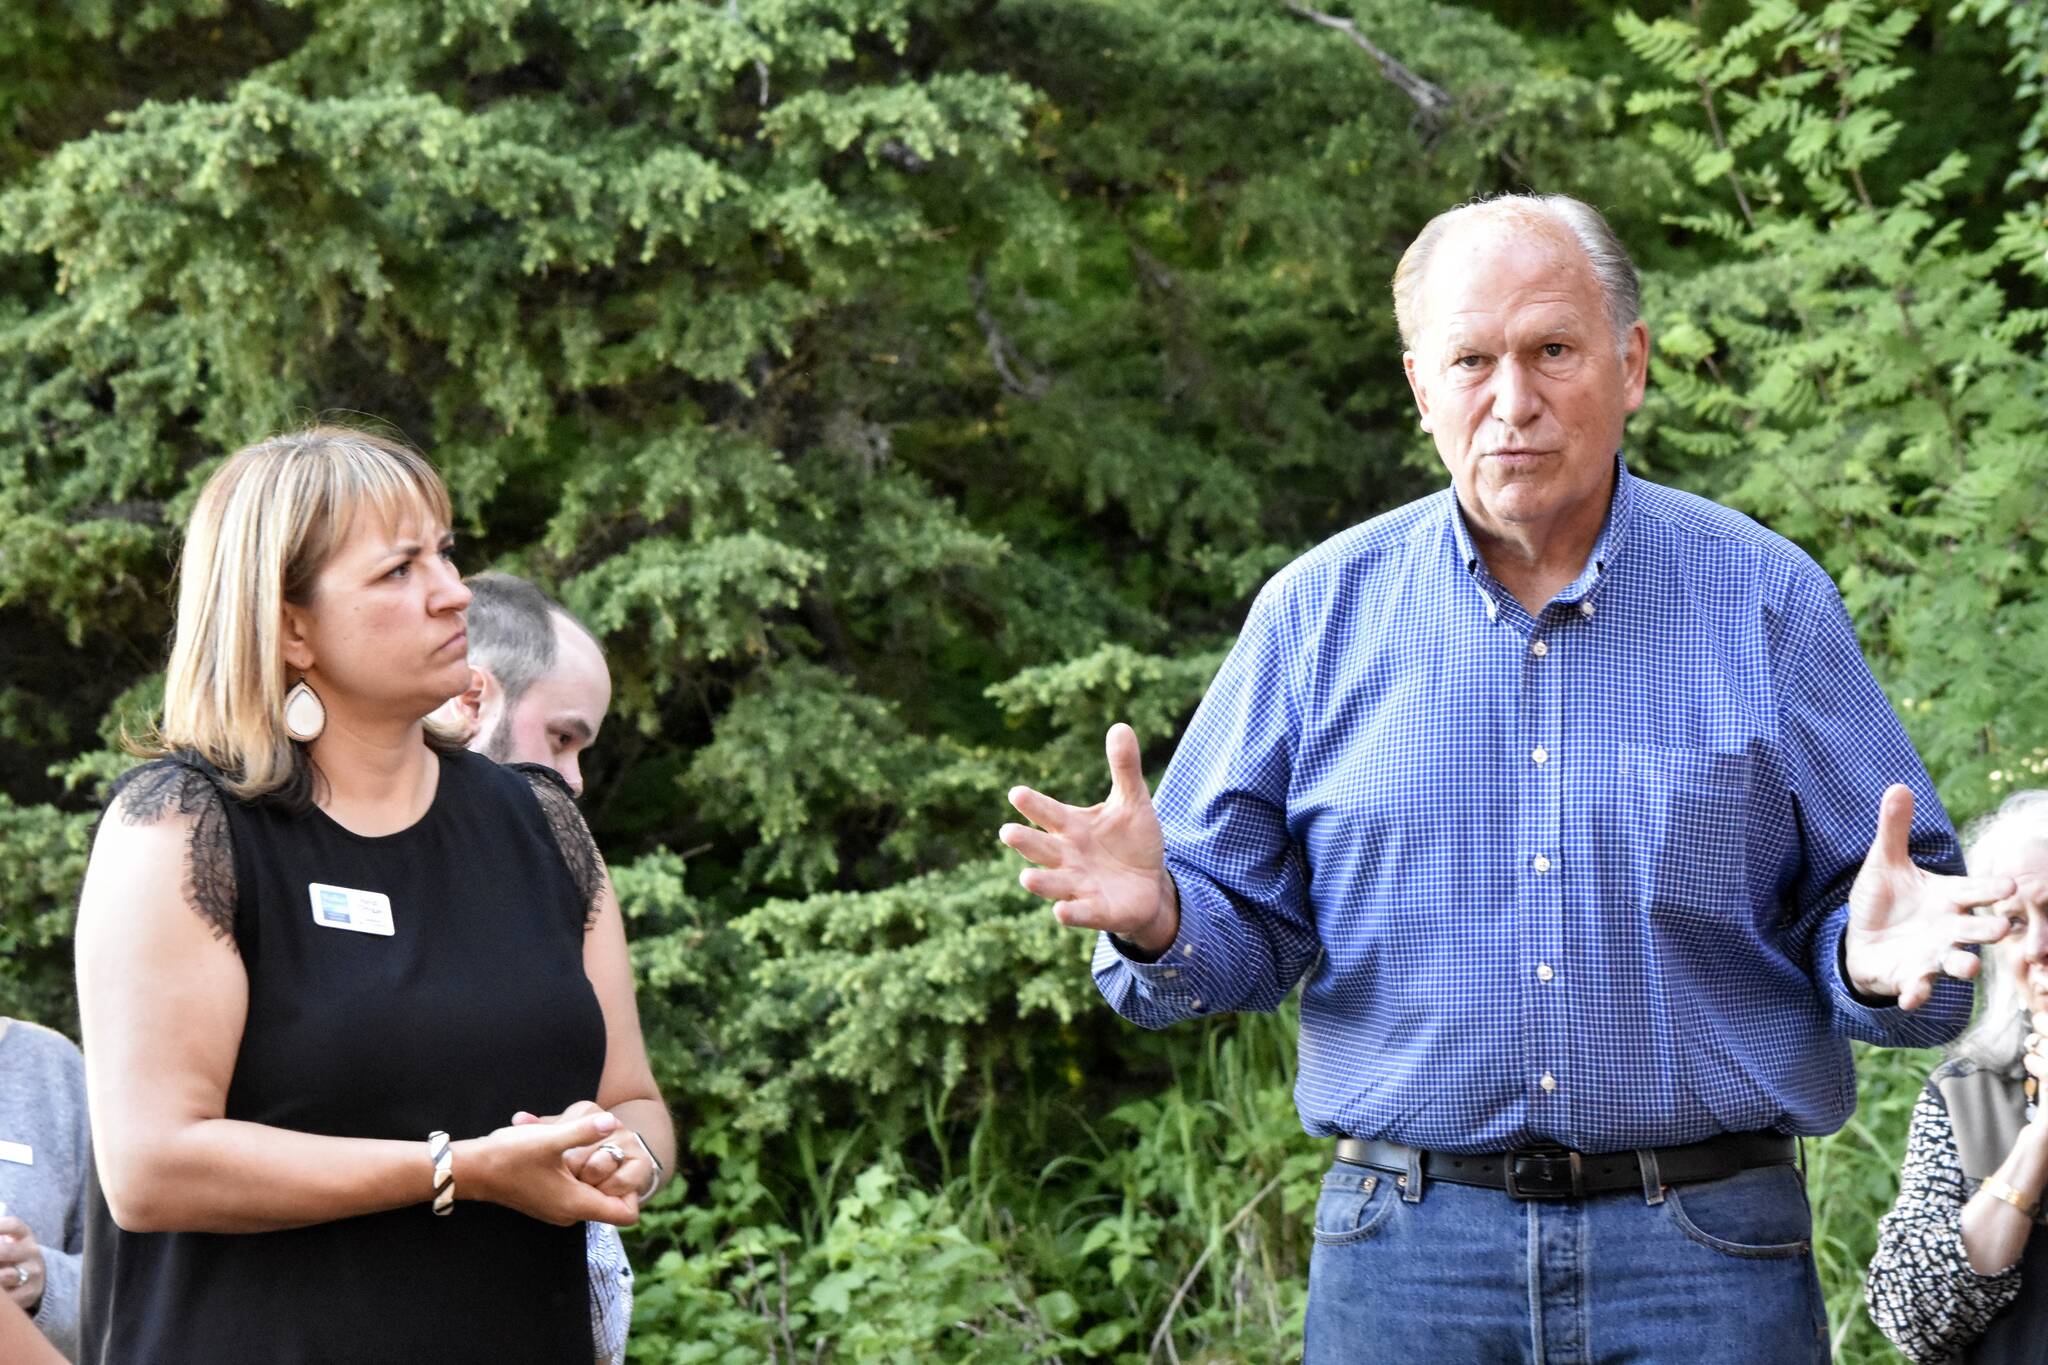 Former Gov. Bill Walker, right, and his running mate former commissioner of the Department of Labor and Workforce Development Heidi Drygas, speak to Juneauites gathered for a fundraiser at a private home in Juneau on Tuesday, June 7, 2022. (Peter Segall / Juneau Empire File)